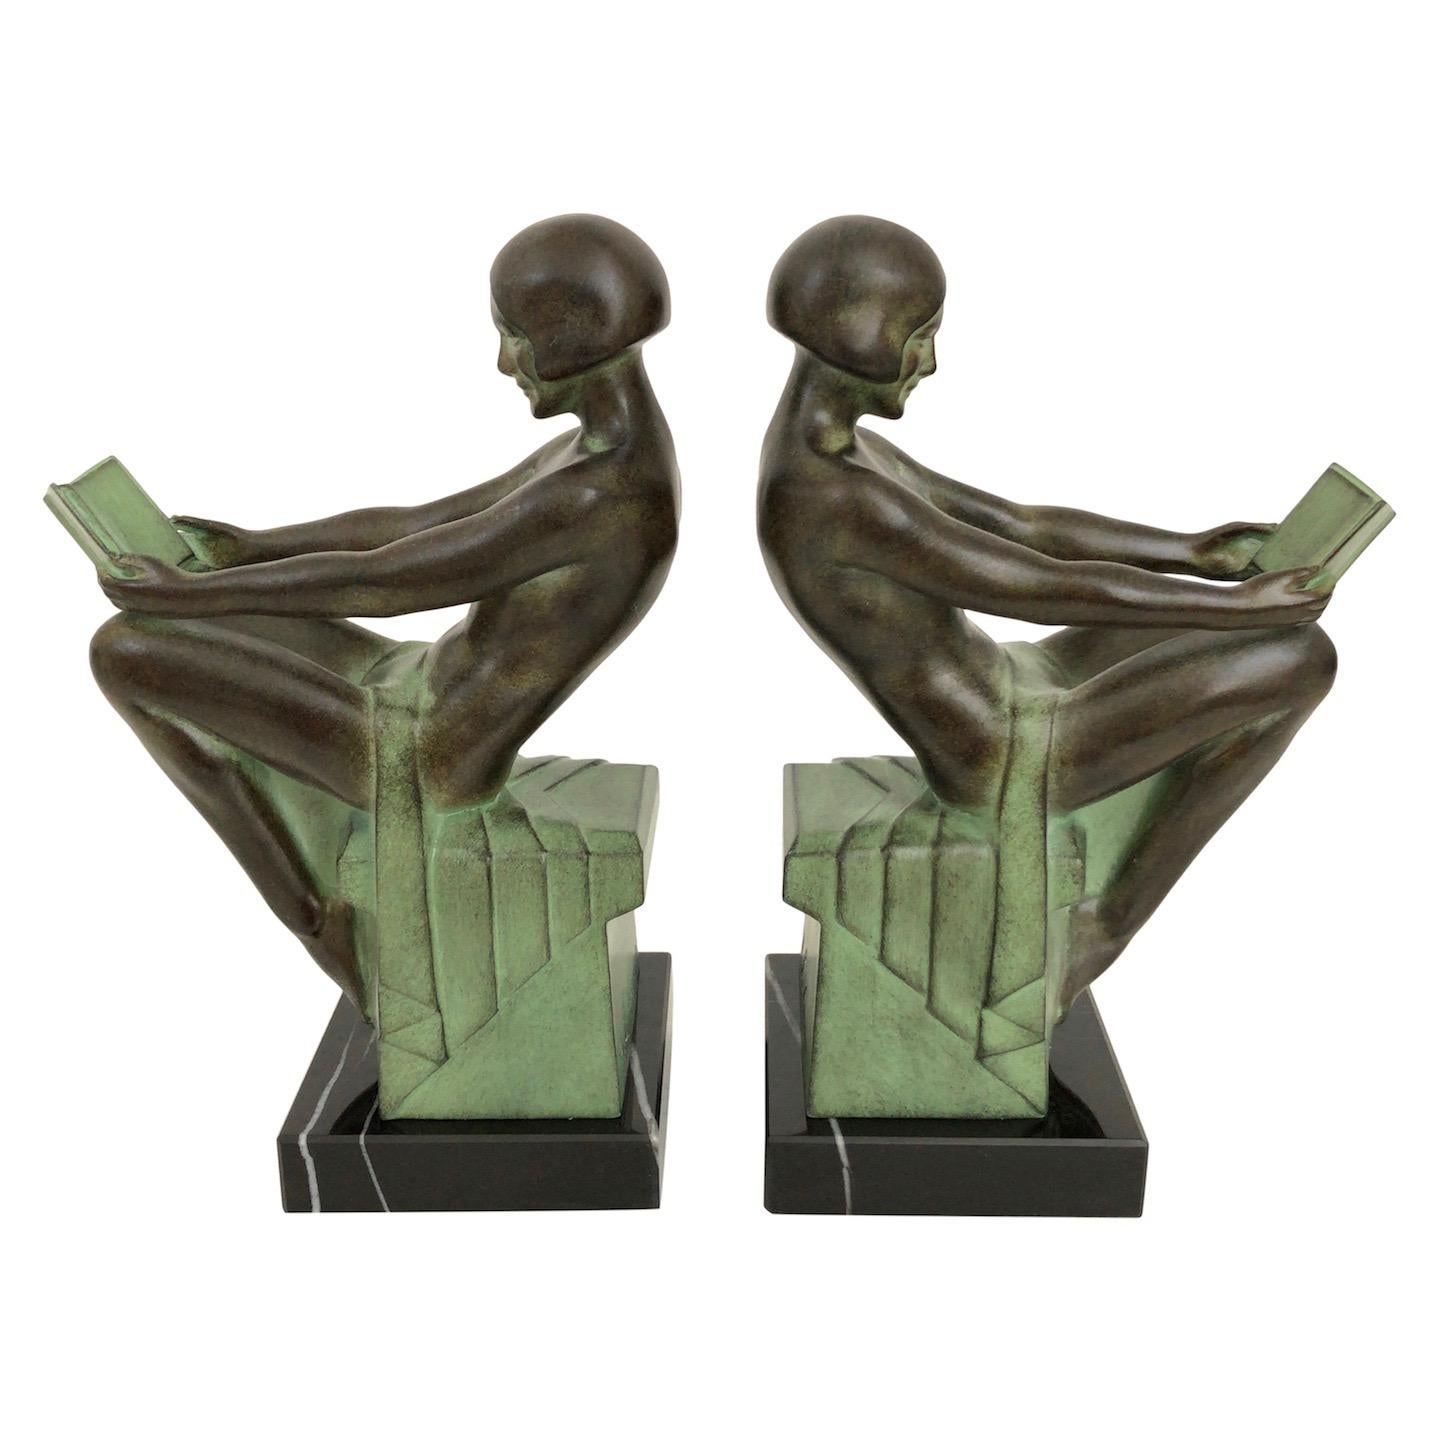 “Delassement”
Original “Max Le Verrier”
Designed in France during the roaring 1920s by “Max Le Verrier” (1891-1973)
Art Deco style, France.

These sculptures by Max Le Verrier encapsulates the timeless elegance and sophistication of the Art Deco